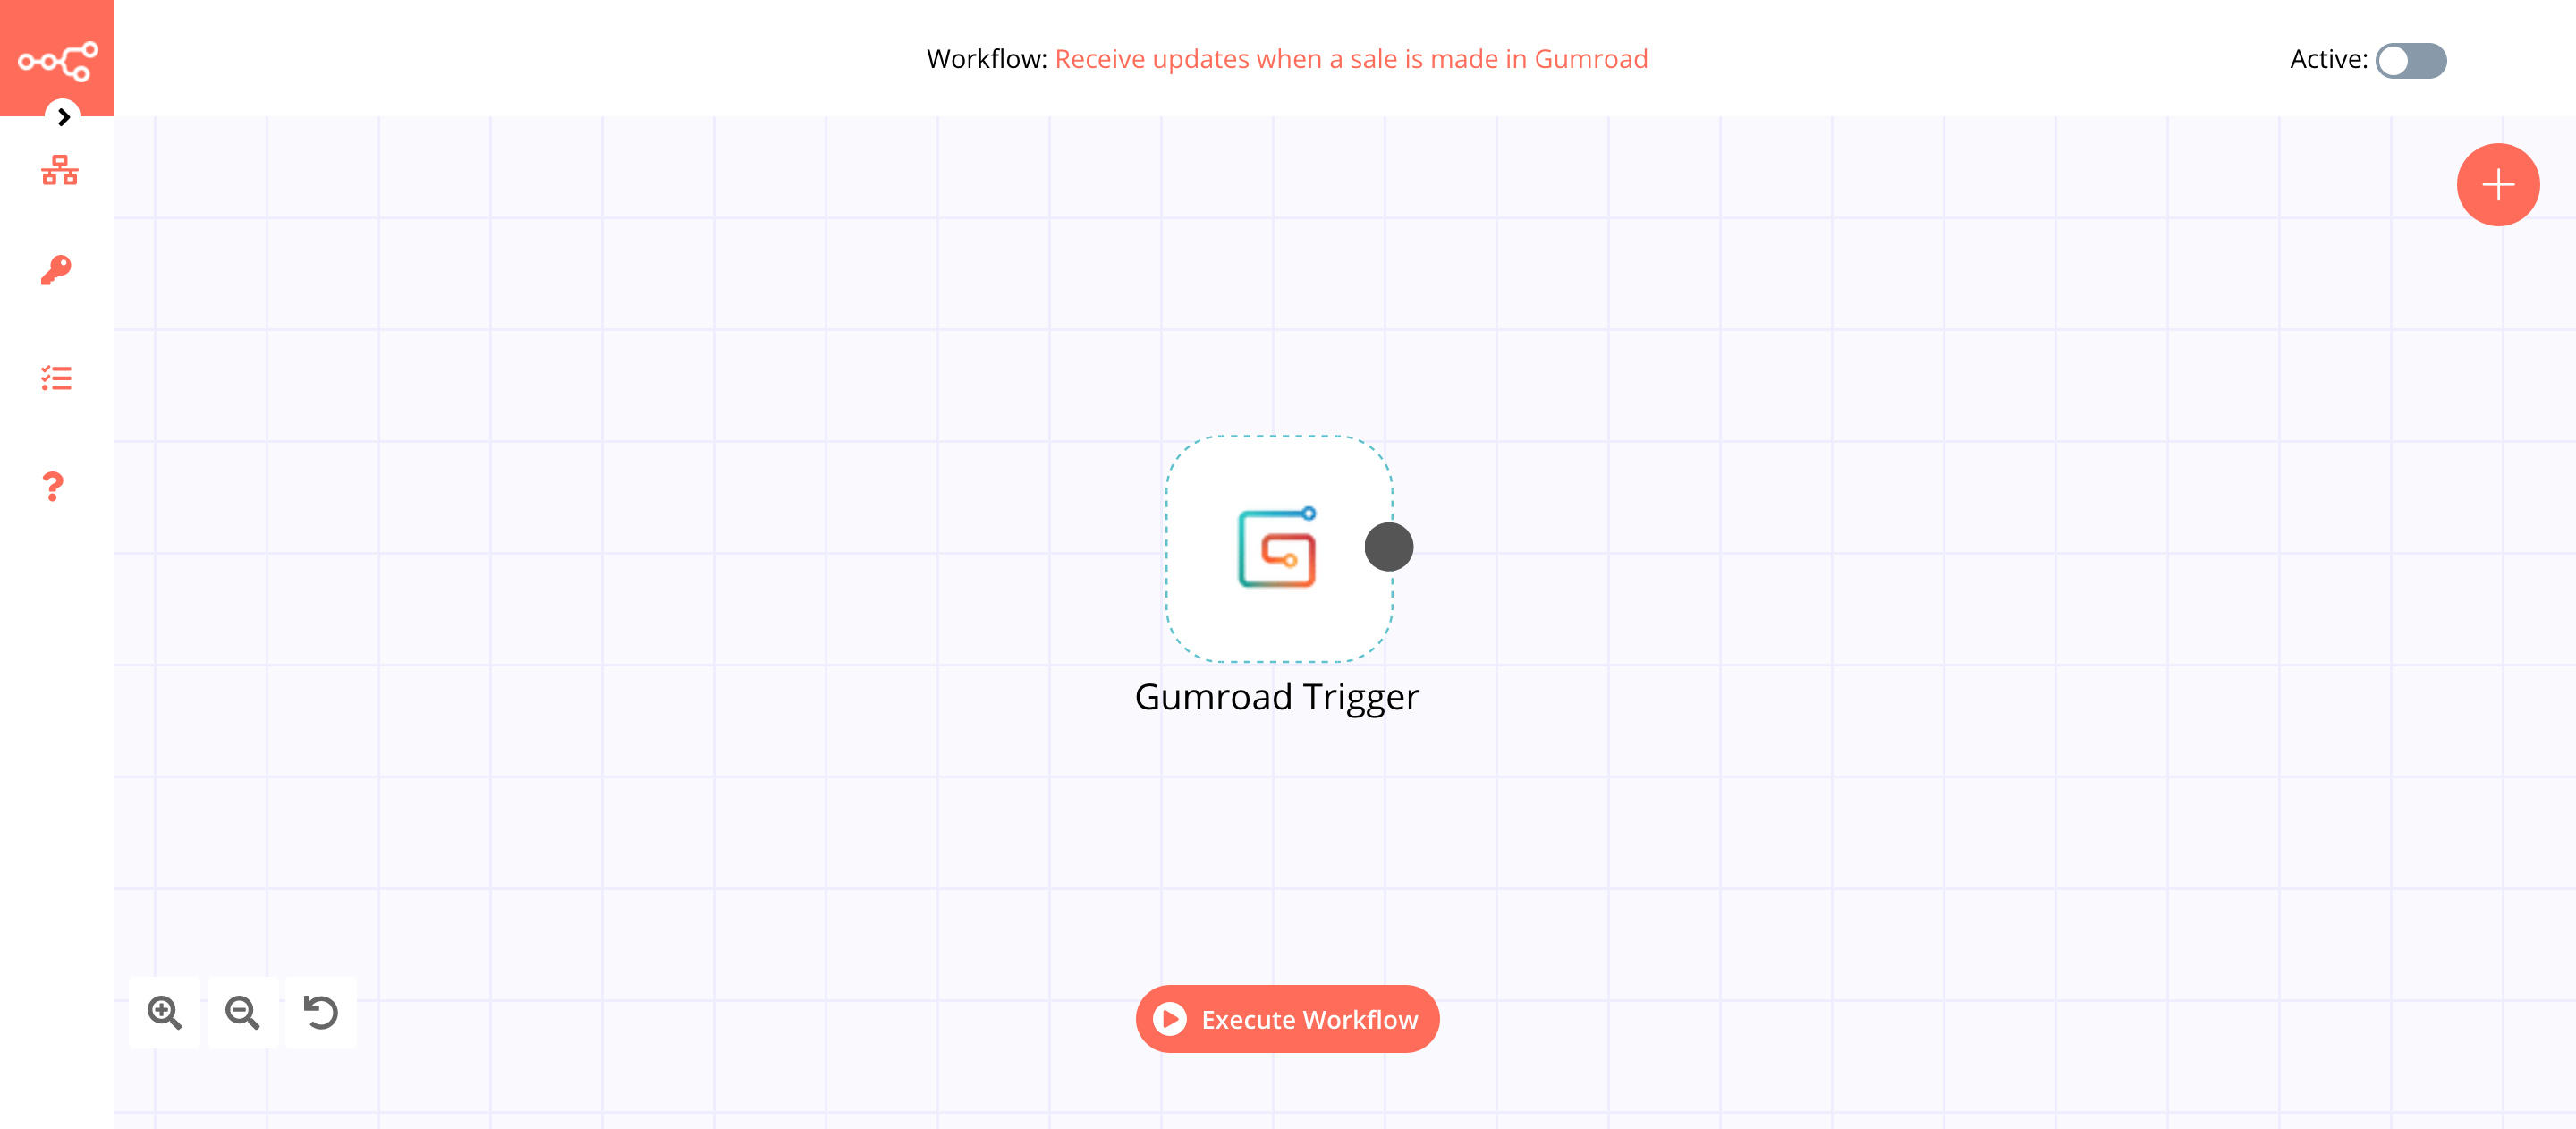 A workflow with the Gumroad Trigger node